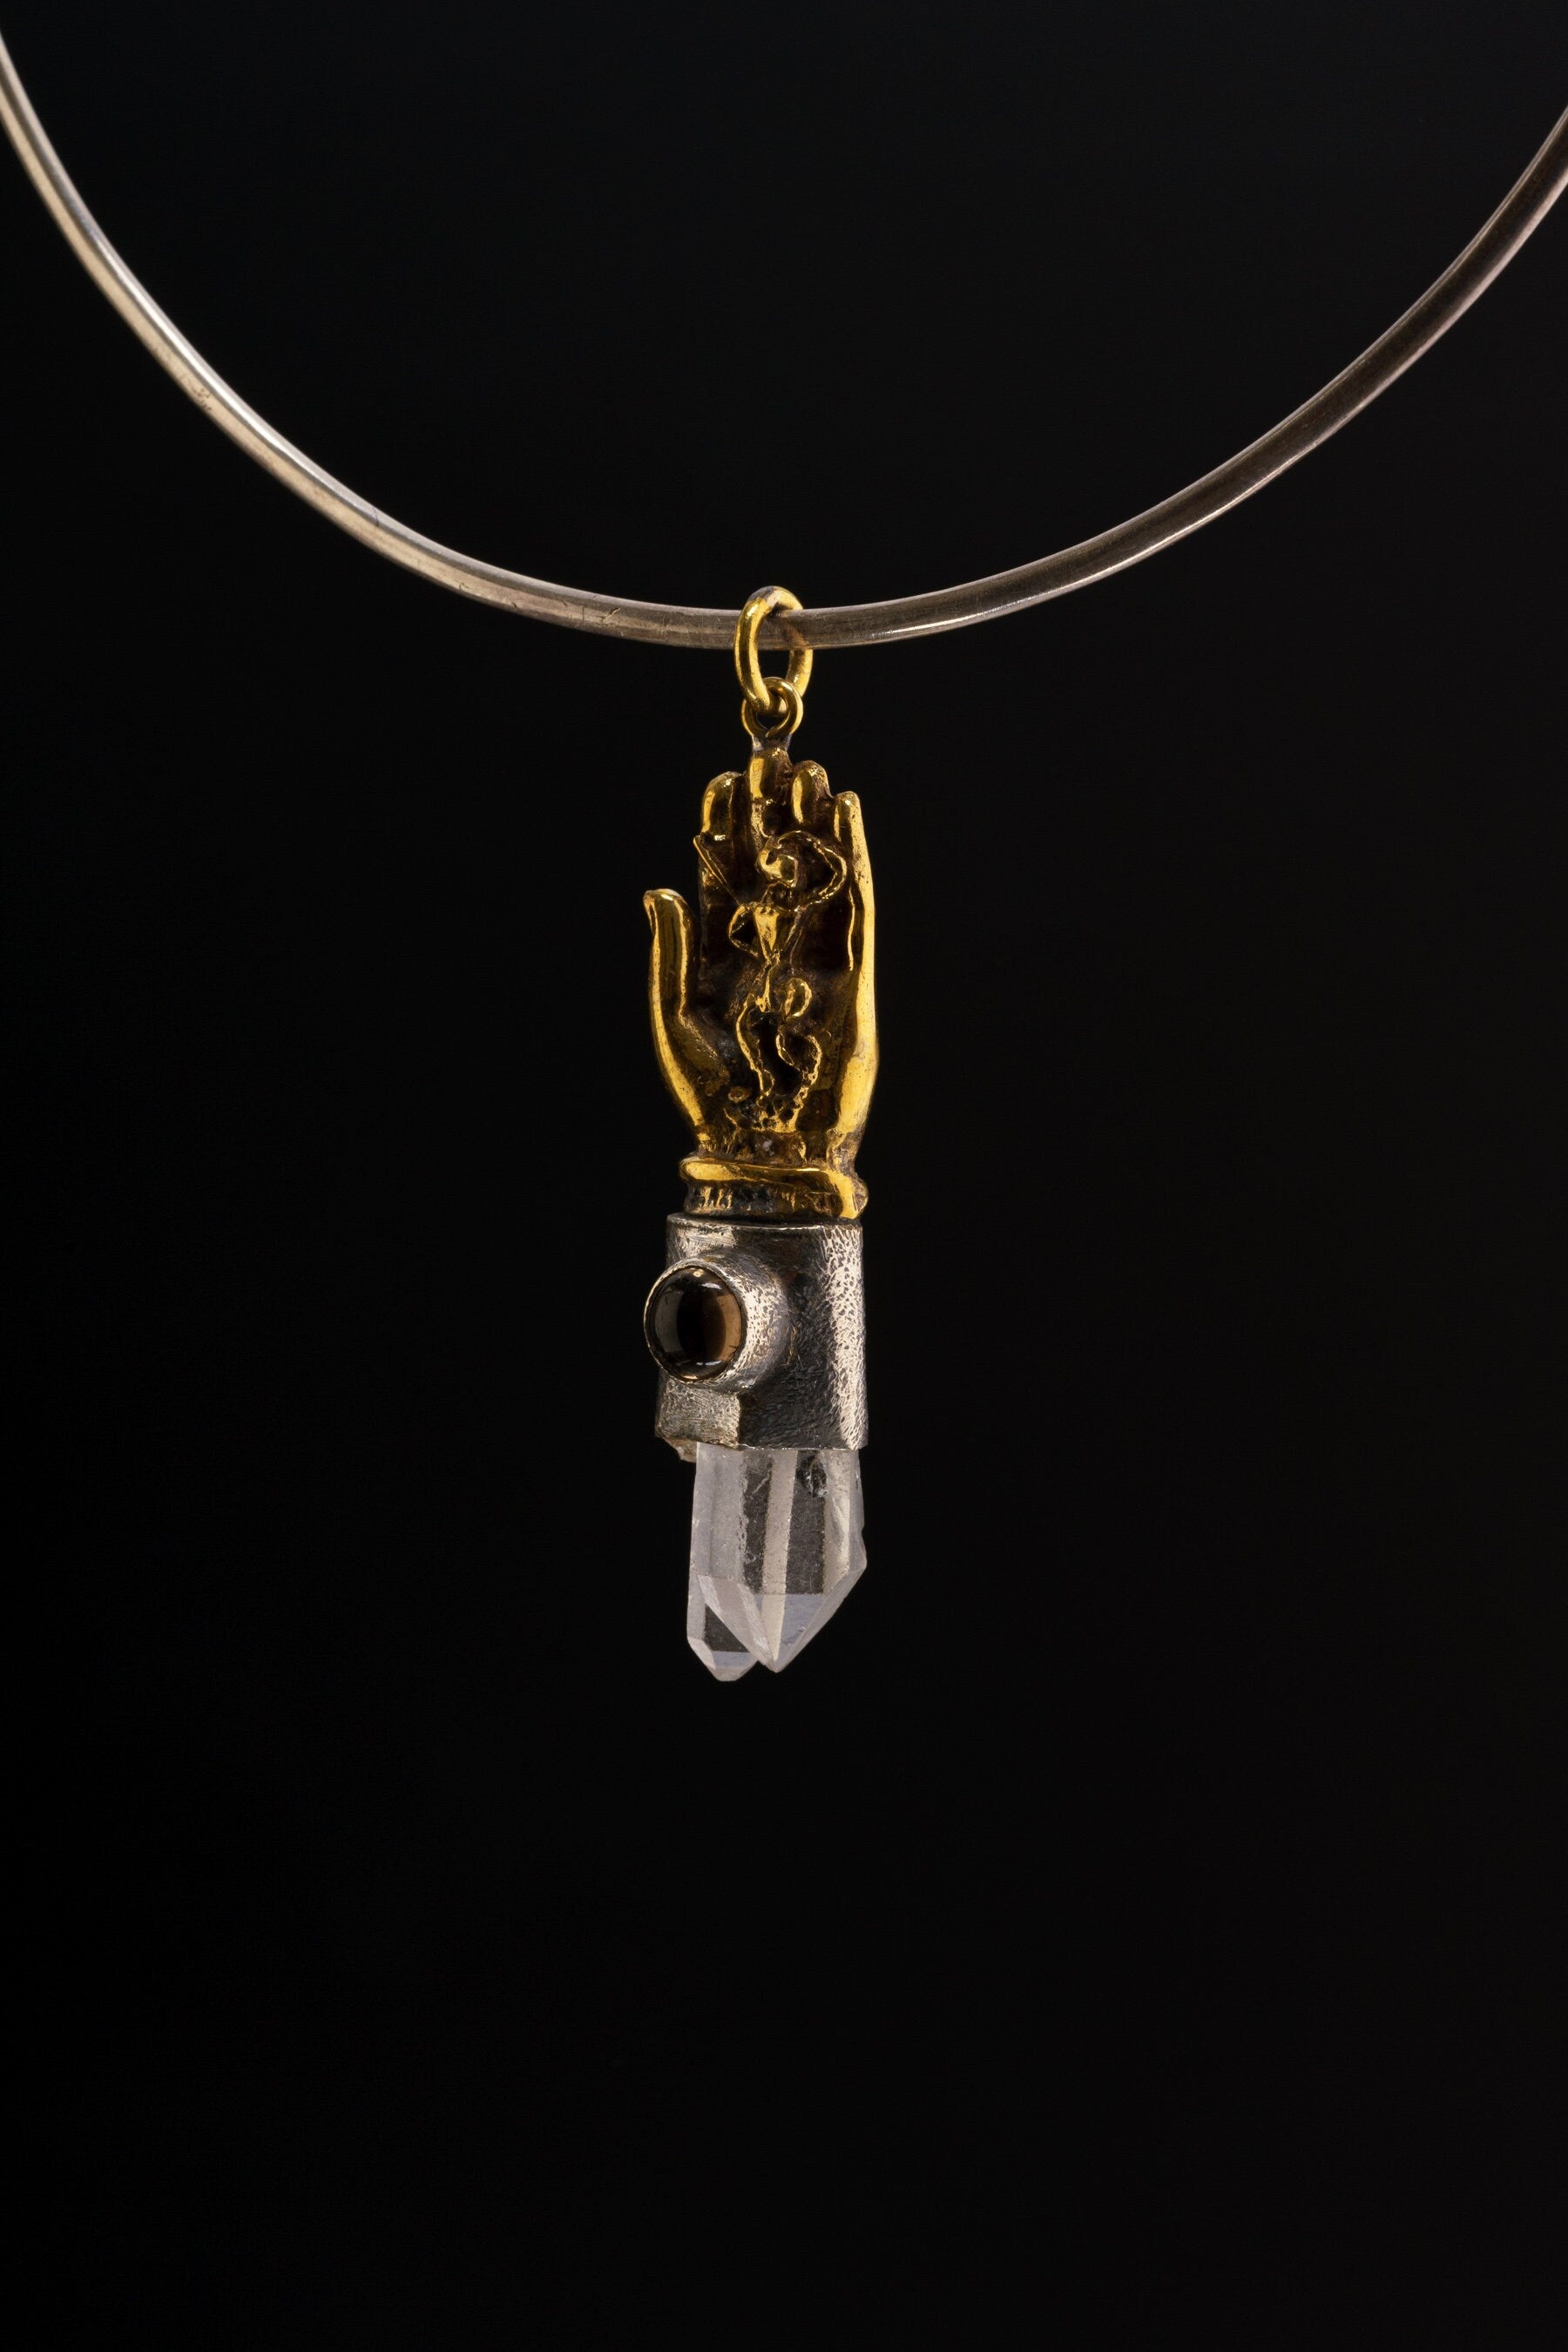 Twin Terminated Himalayan Quartz & Smoky Quartz Cabochon - Brushed Sterling Silver - Monkey King in Buddhas Hand - Crystal Pendant